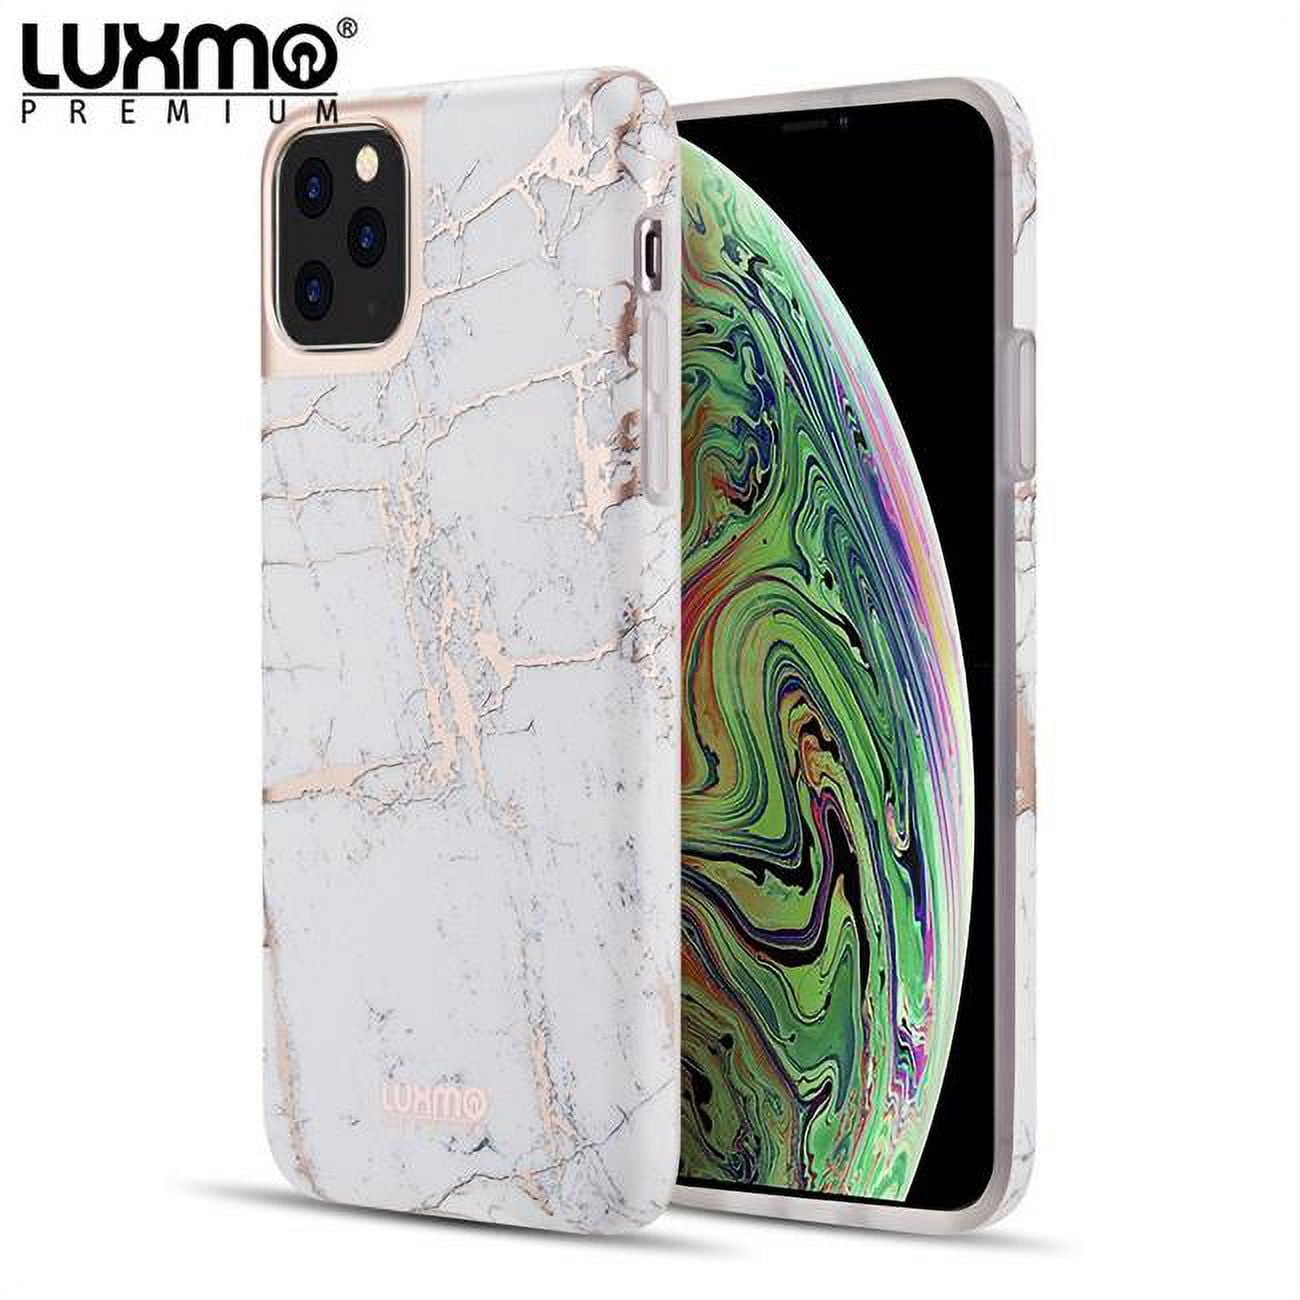 Picture of Dream Wireless CSIP1261-MBC-WRM Luxmo Premium Marblicious Collection Matted Marble TPU Case for iPhone 12 6.1 - 12 Pro 6.1 - White Rose Marble